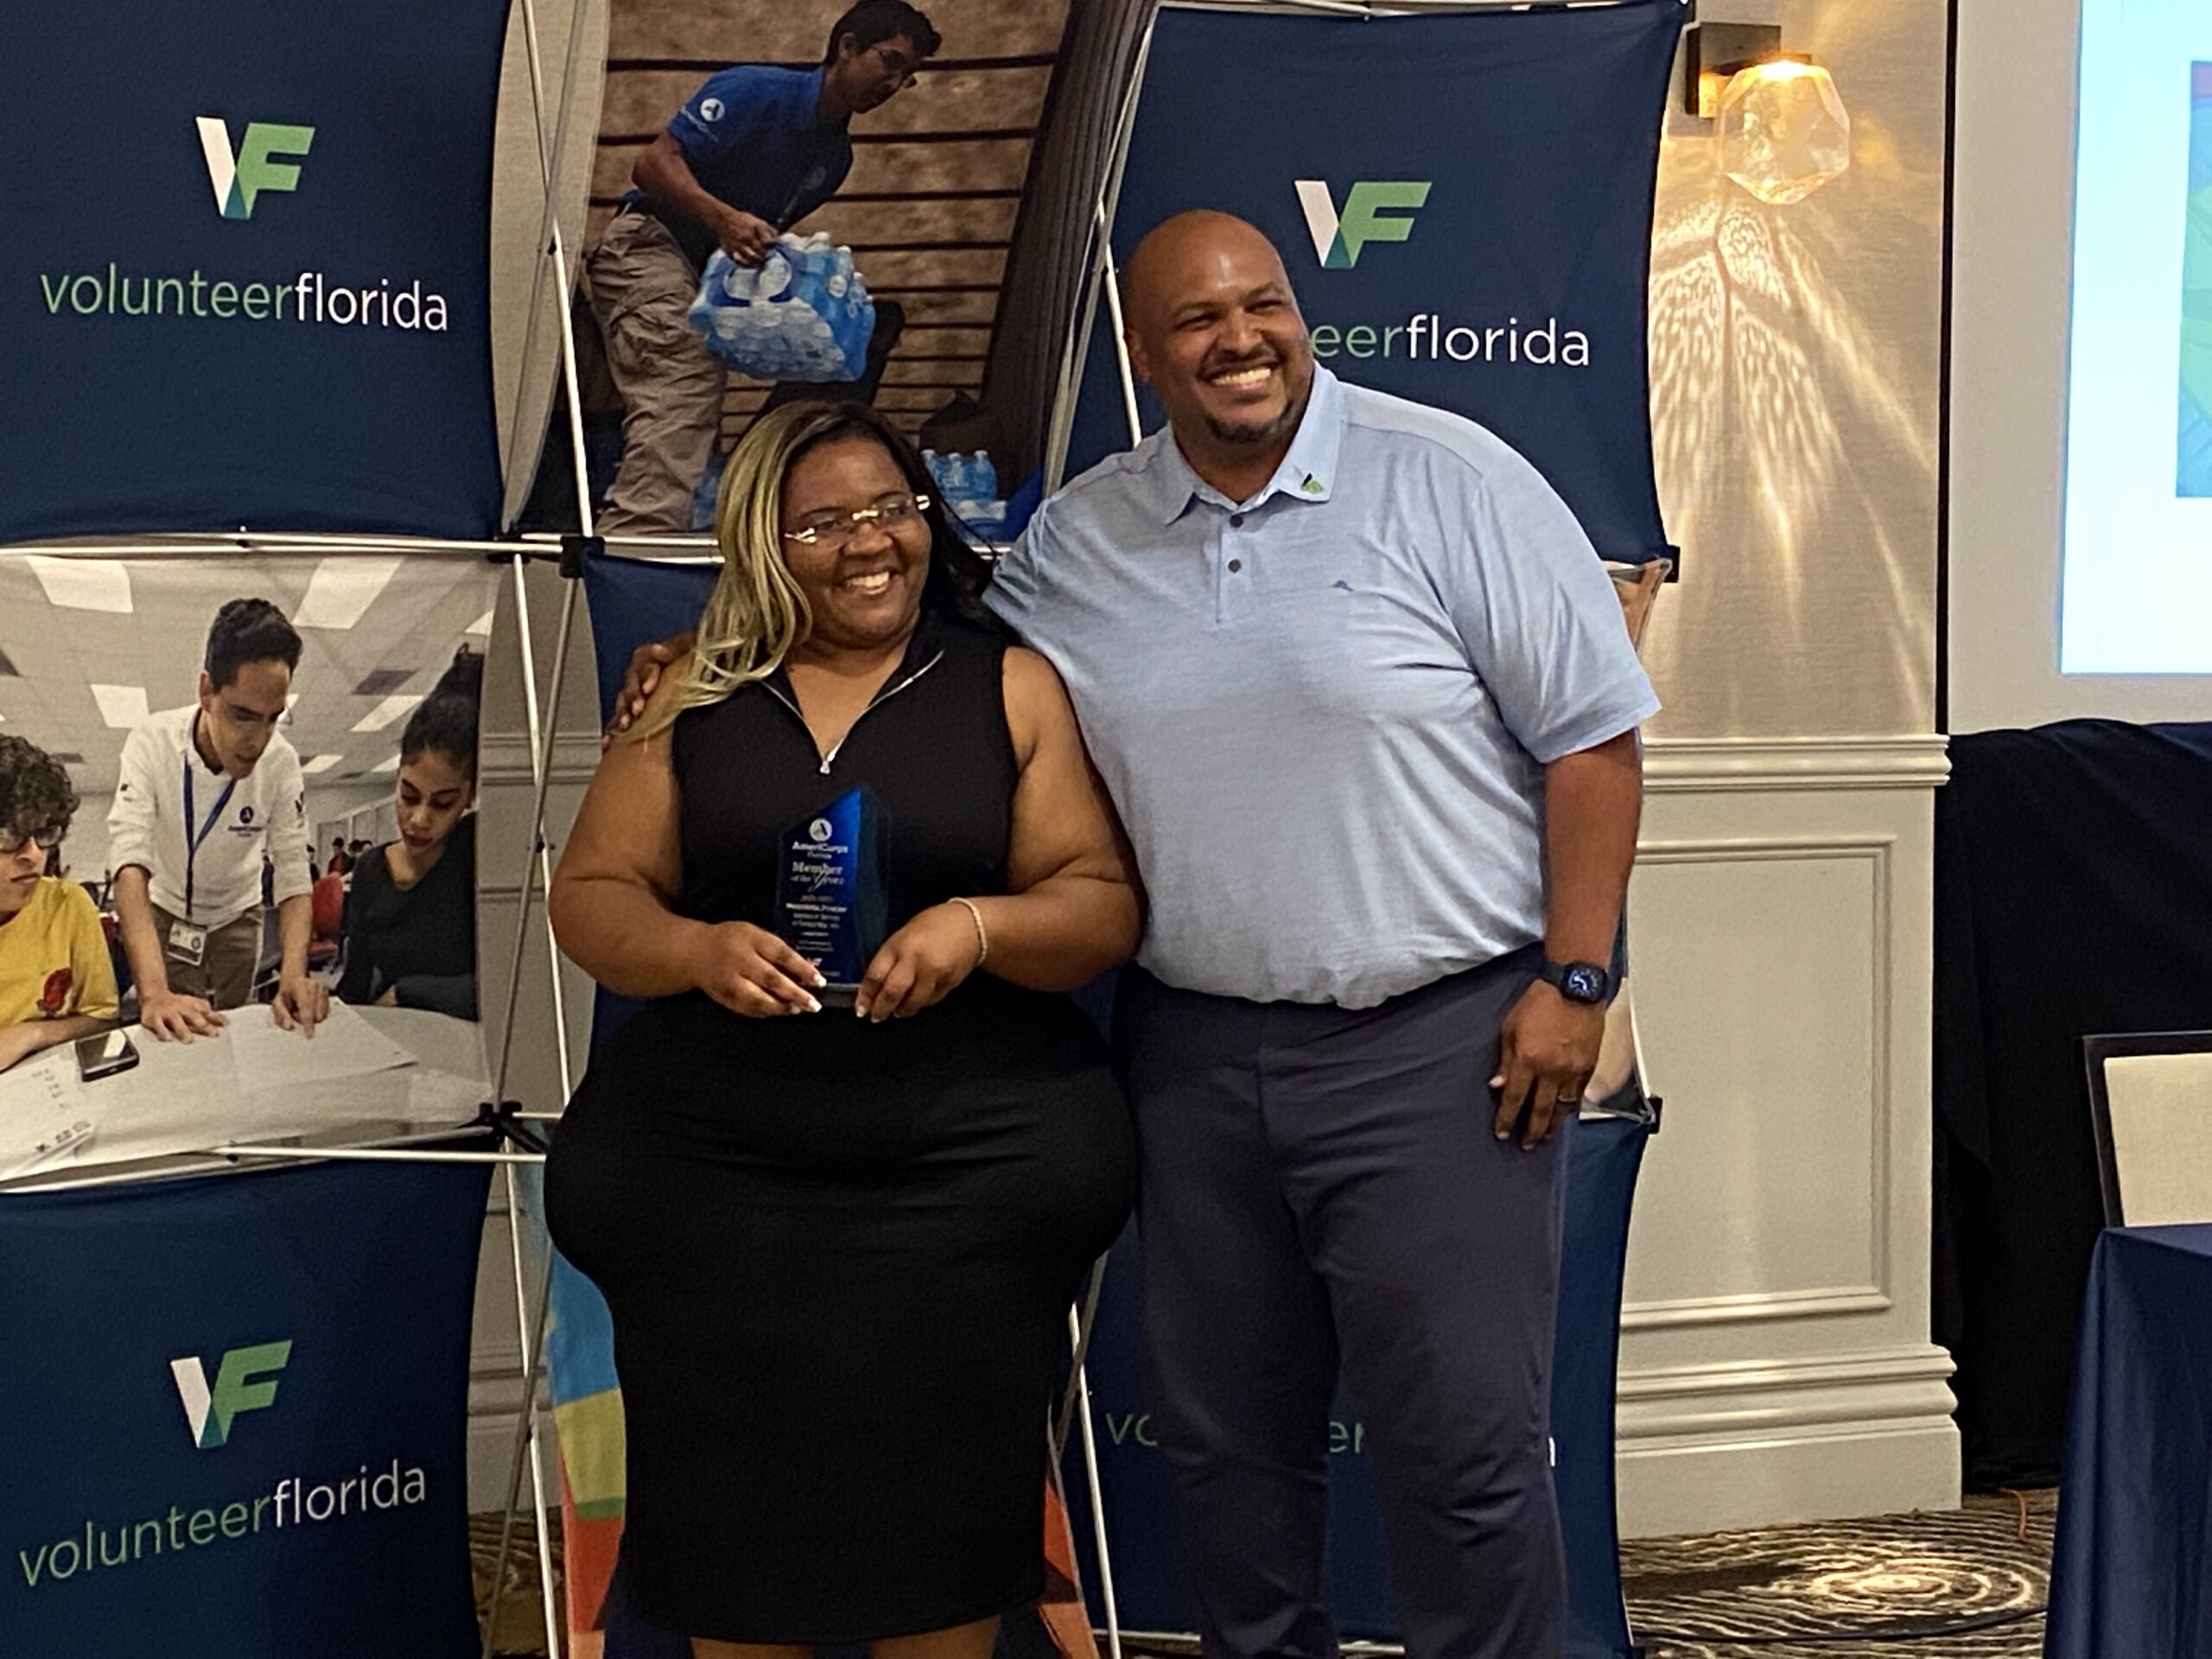 Neonkita Frazier helps Veterans fight homelessness and became Volunteer Florida’s Volunteer of the Year!